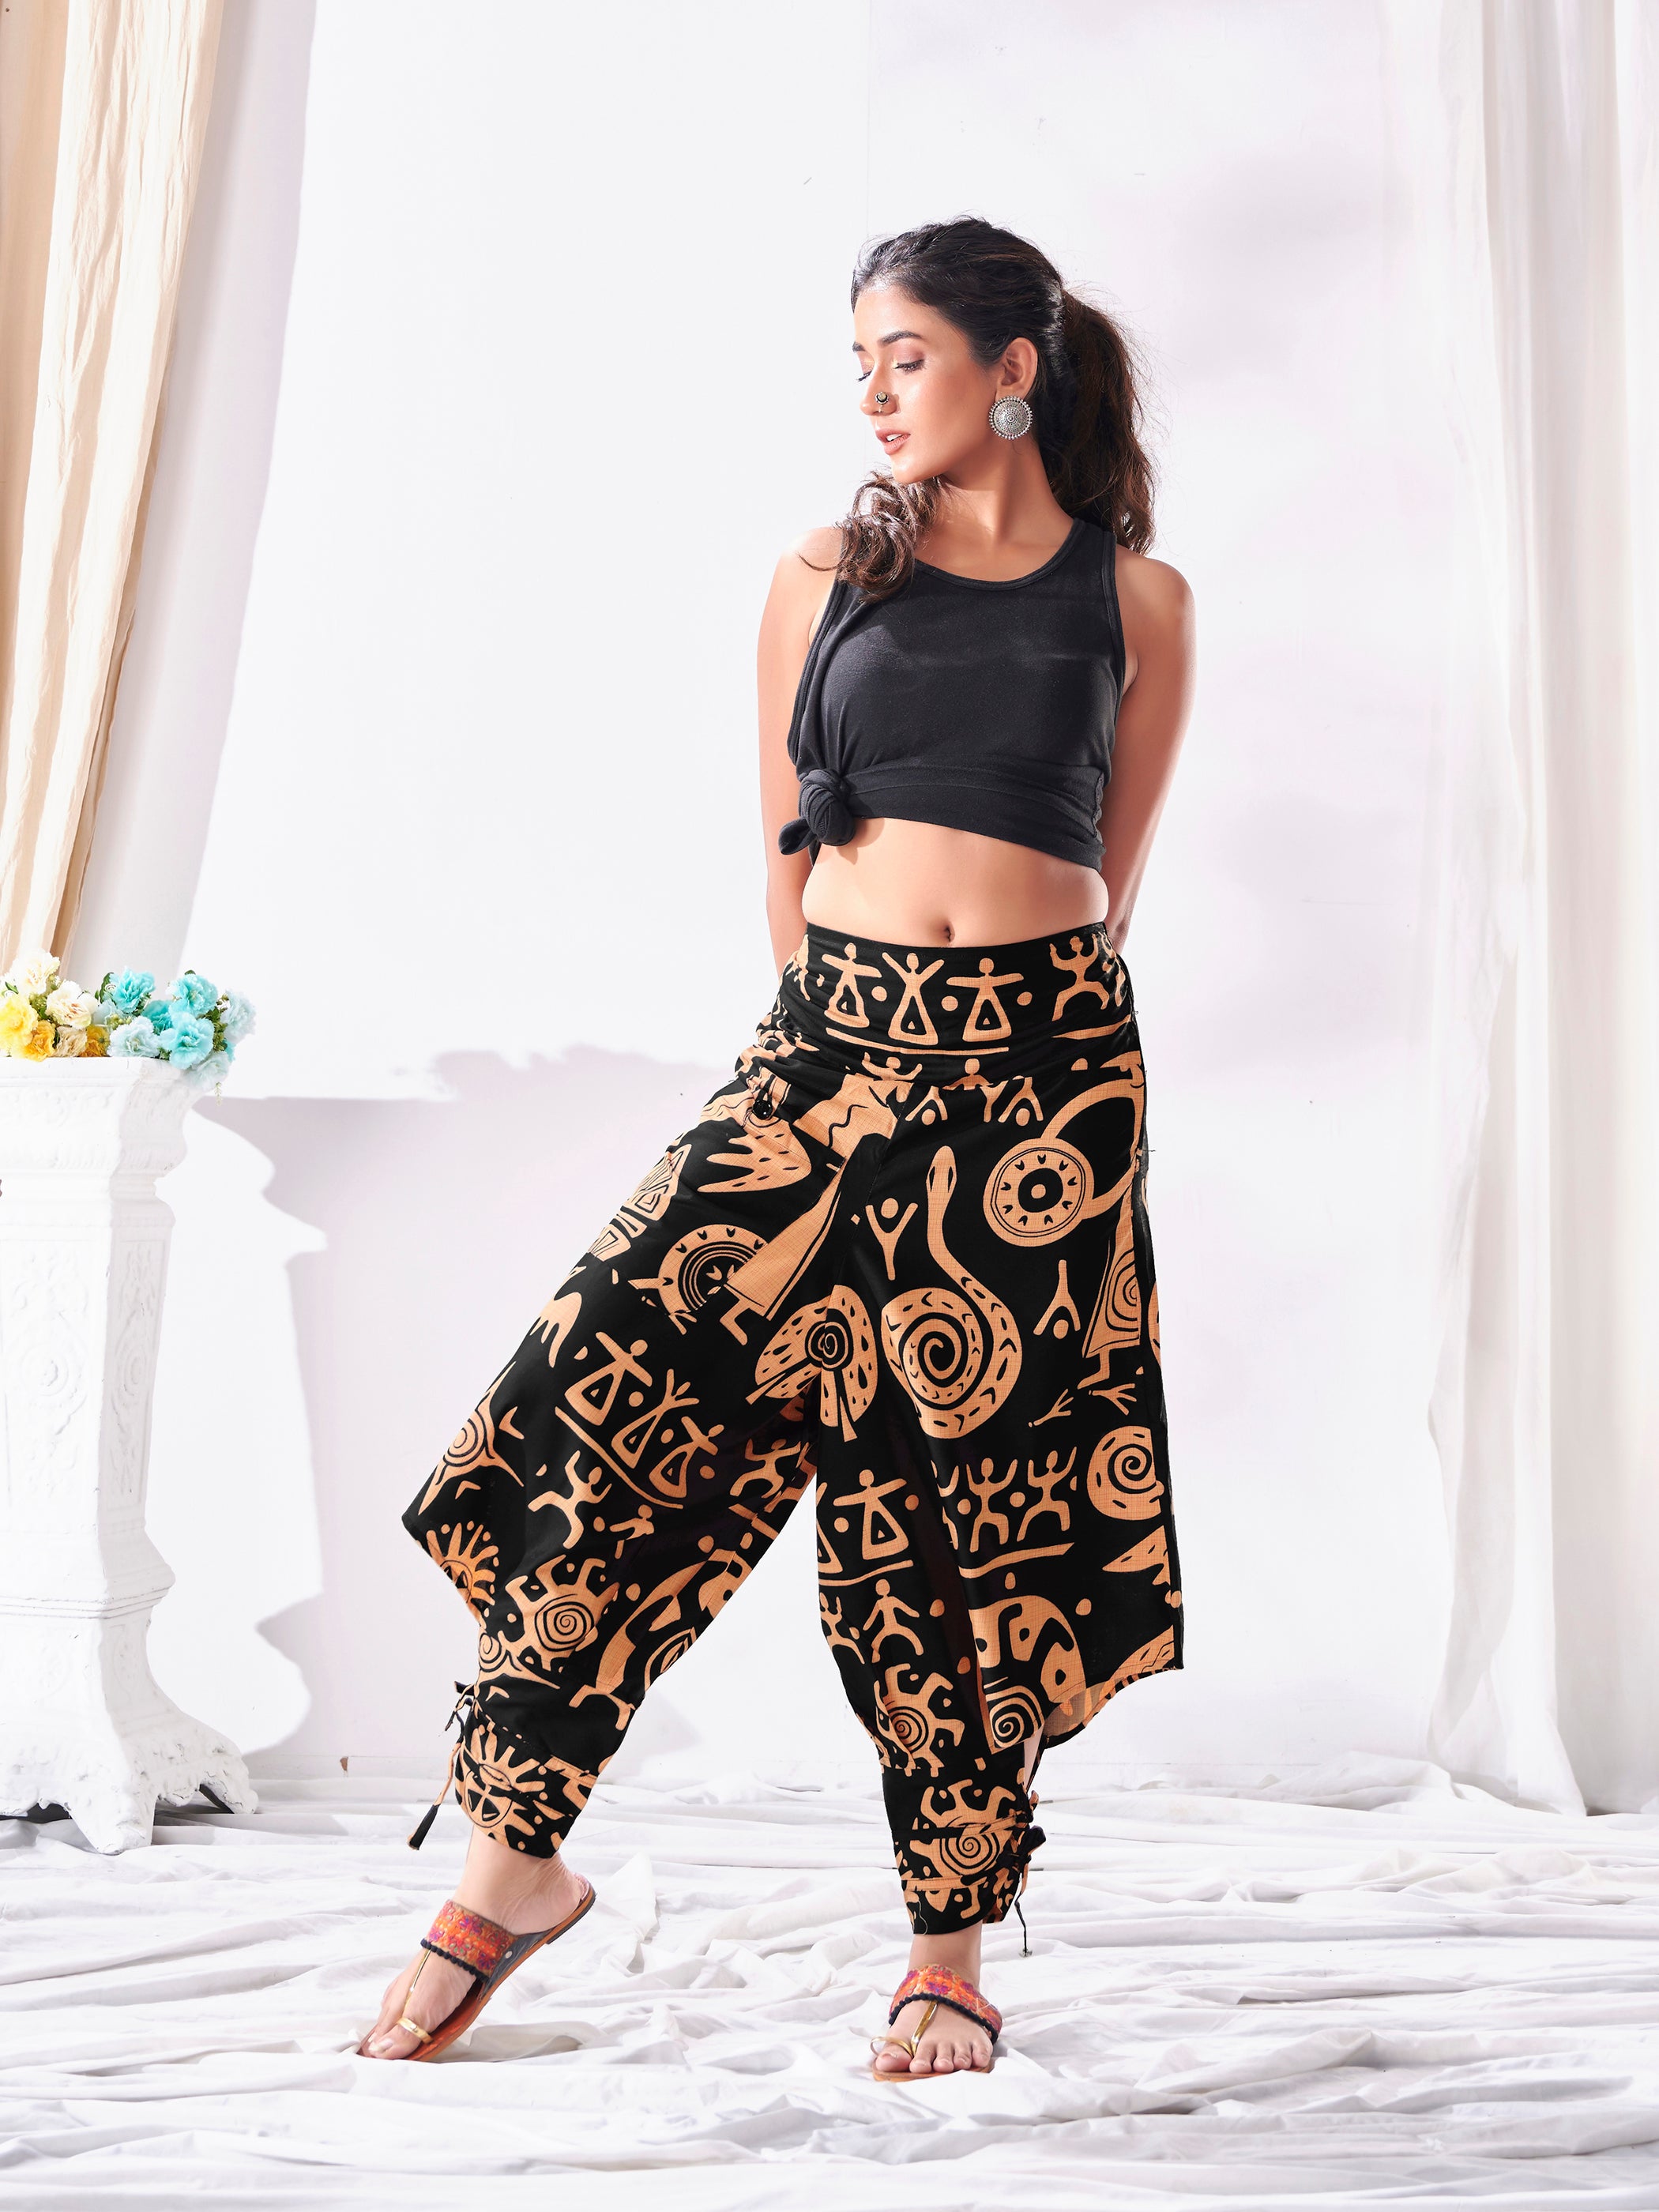 Unisex Mandala Print Dhoti Balloon Harem Pants For Travel Dance Yoga  Introducing our latest addition to the Unisex harem pants collection… |  Instagram